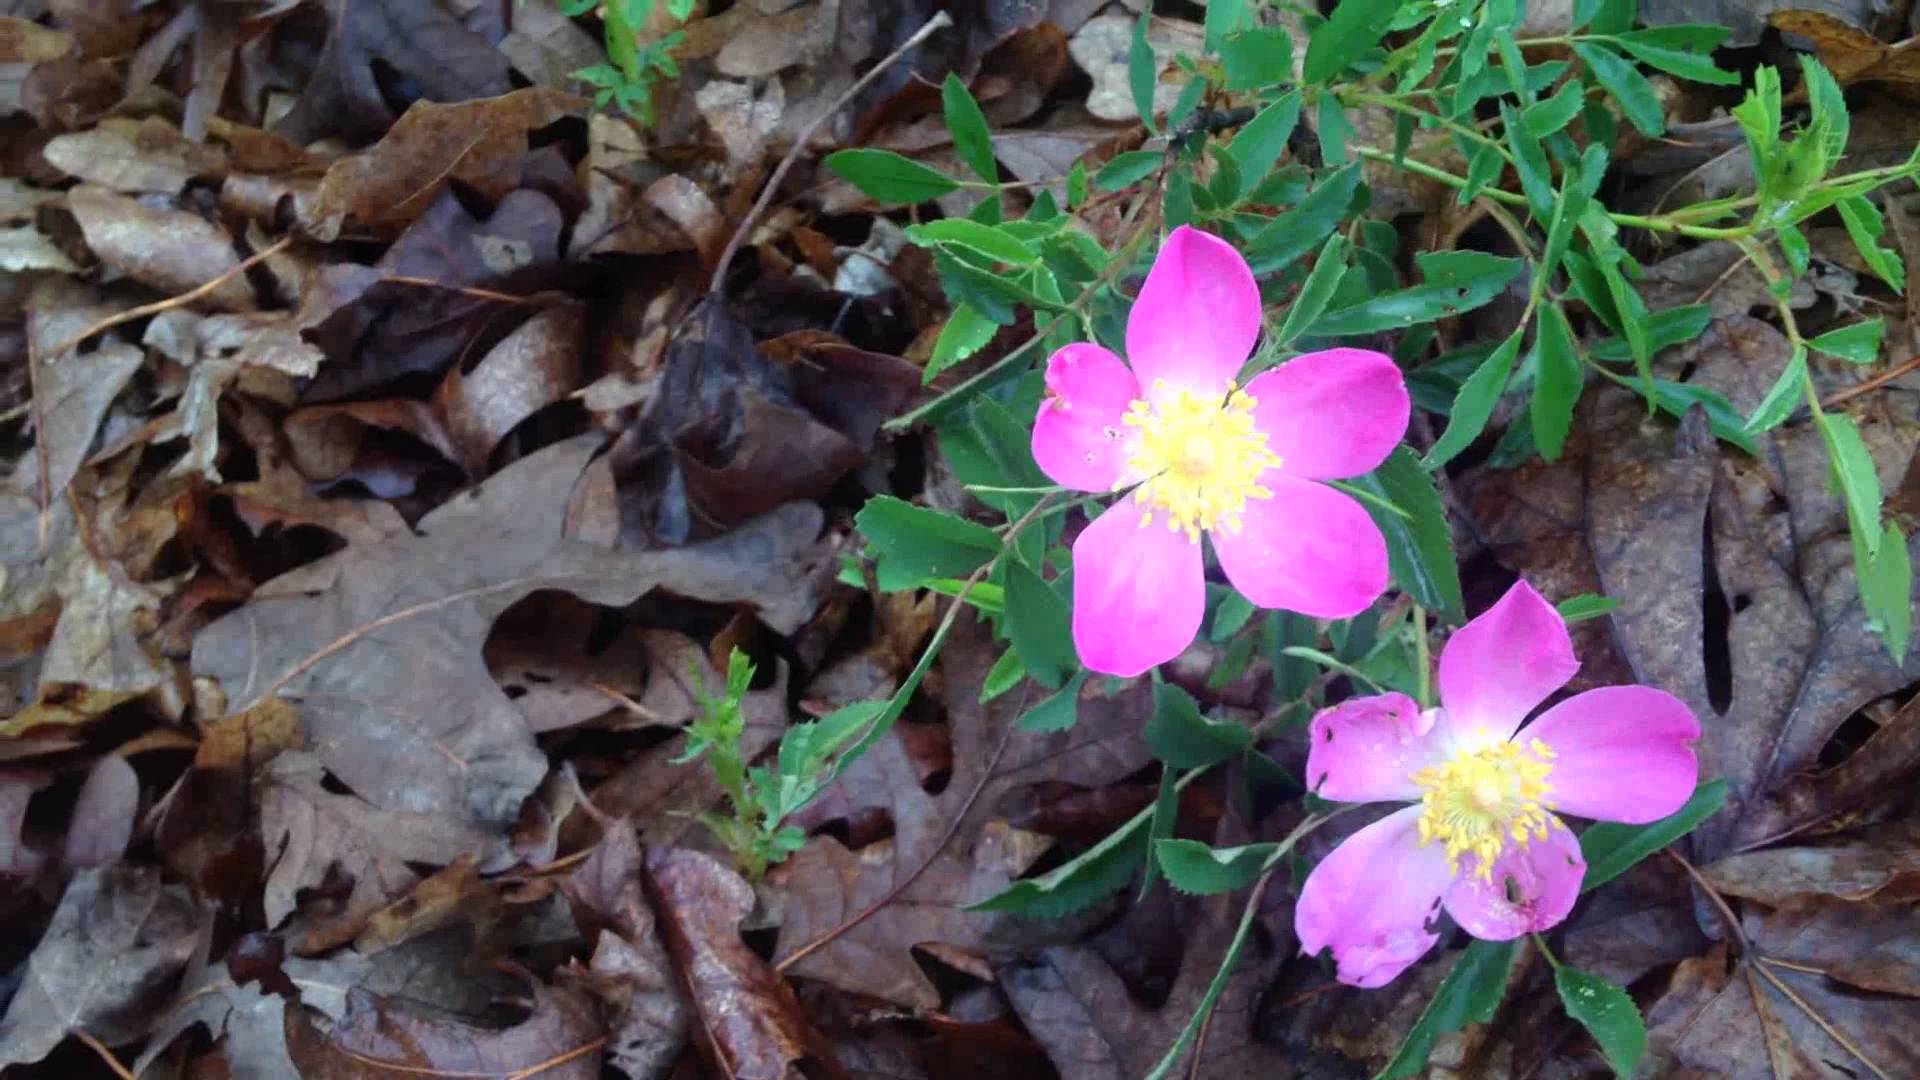 Pink Five Petal Flowers with a Yellow Center - YouTube